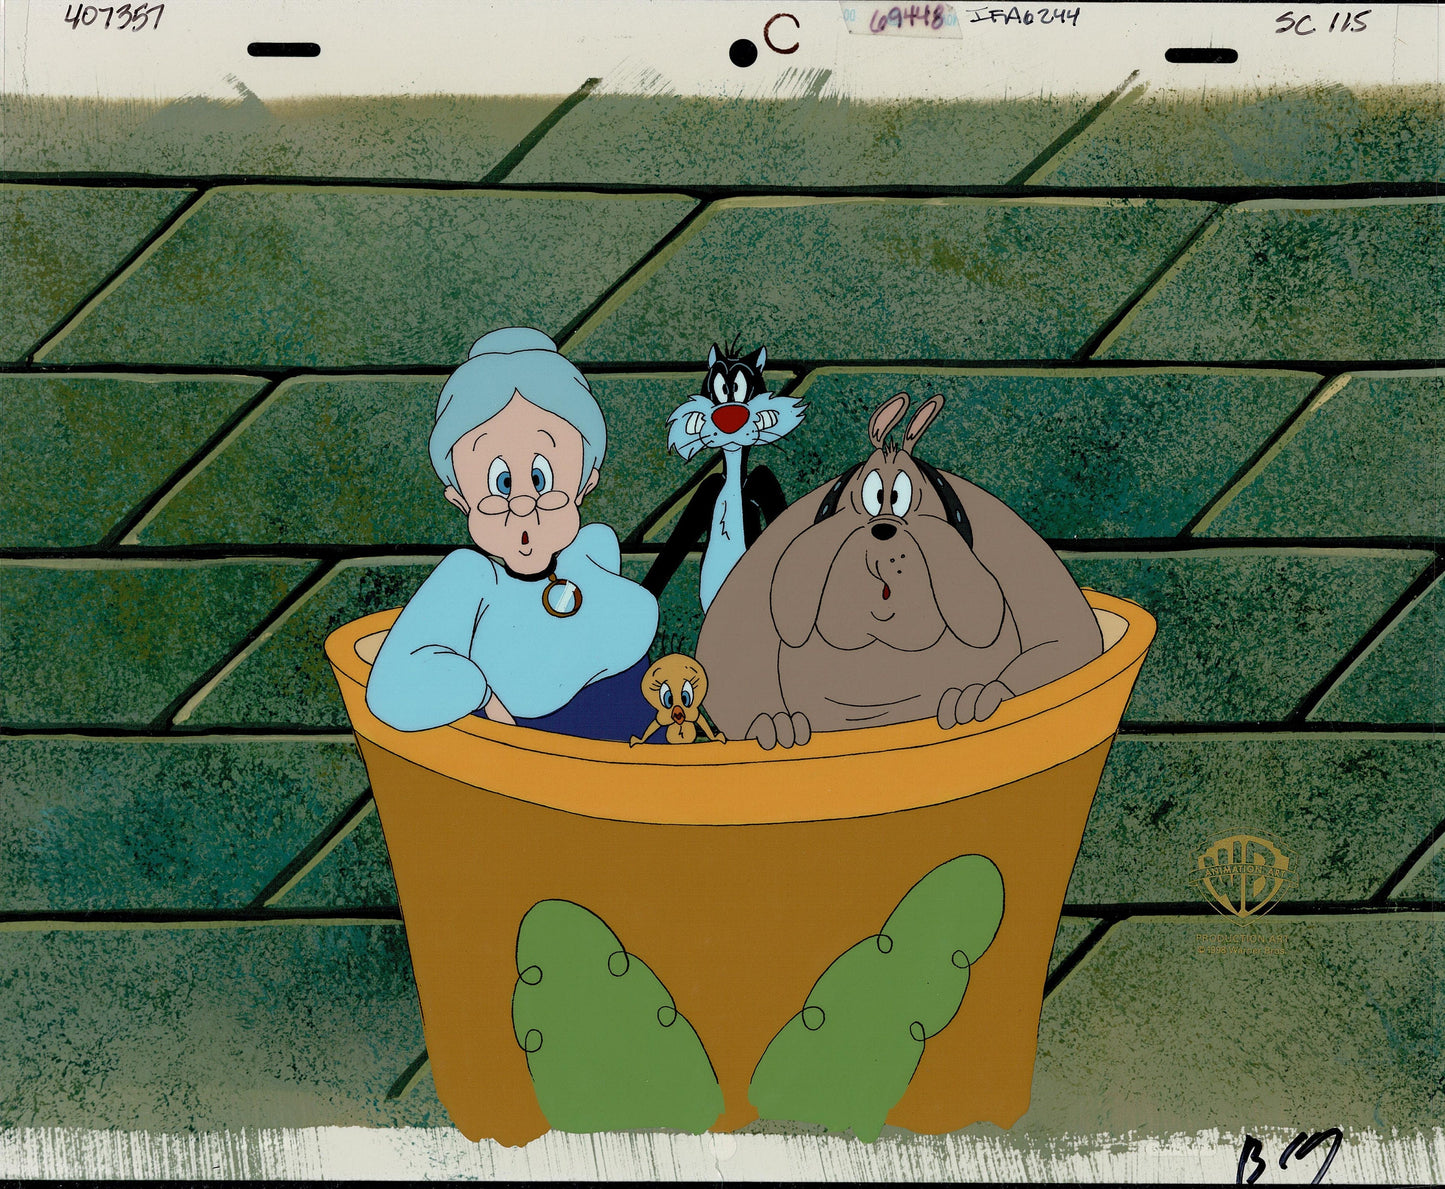 Sylvester and Tweety Mysteries Production Animation Cel from Warner Bros 1995-2000 also Has Granny and Hector the Dog